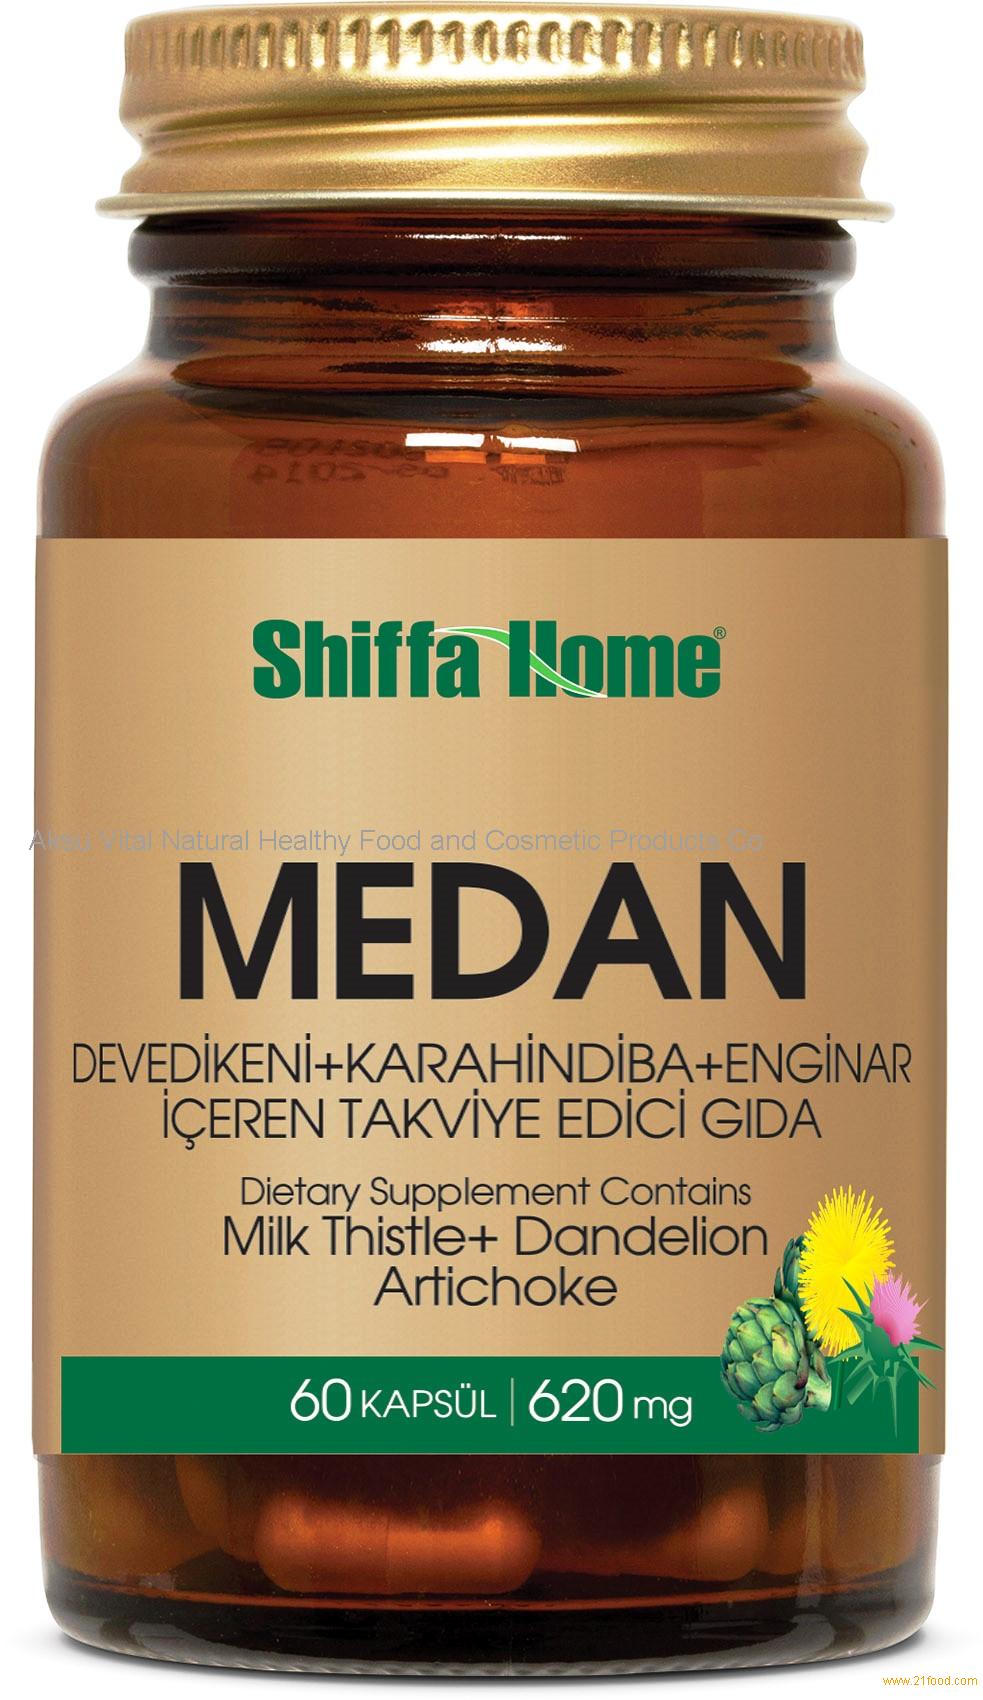 Medan Milk Thistle Extract Capsule Nutrition Supplement for Liver